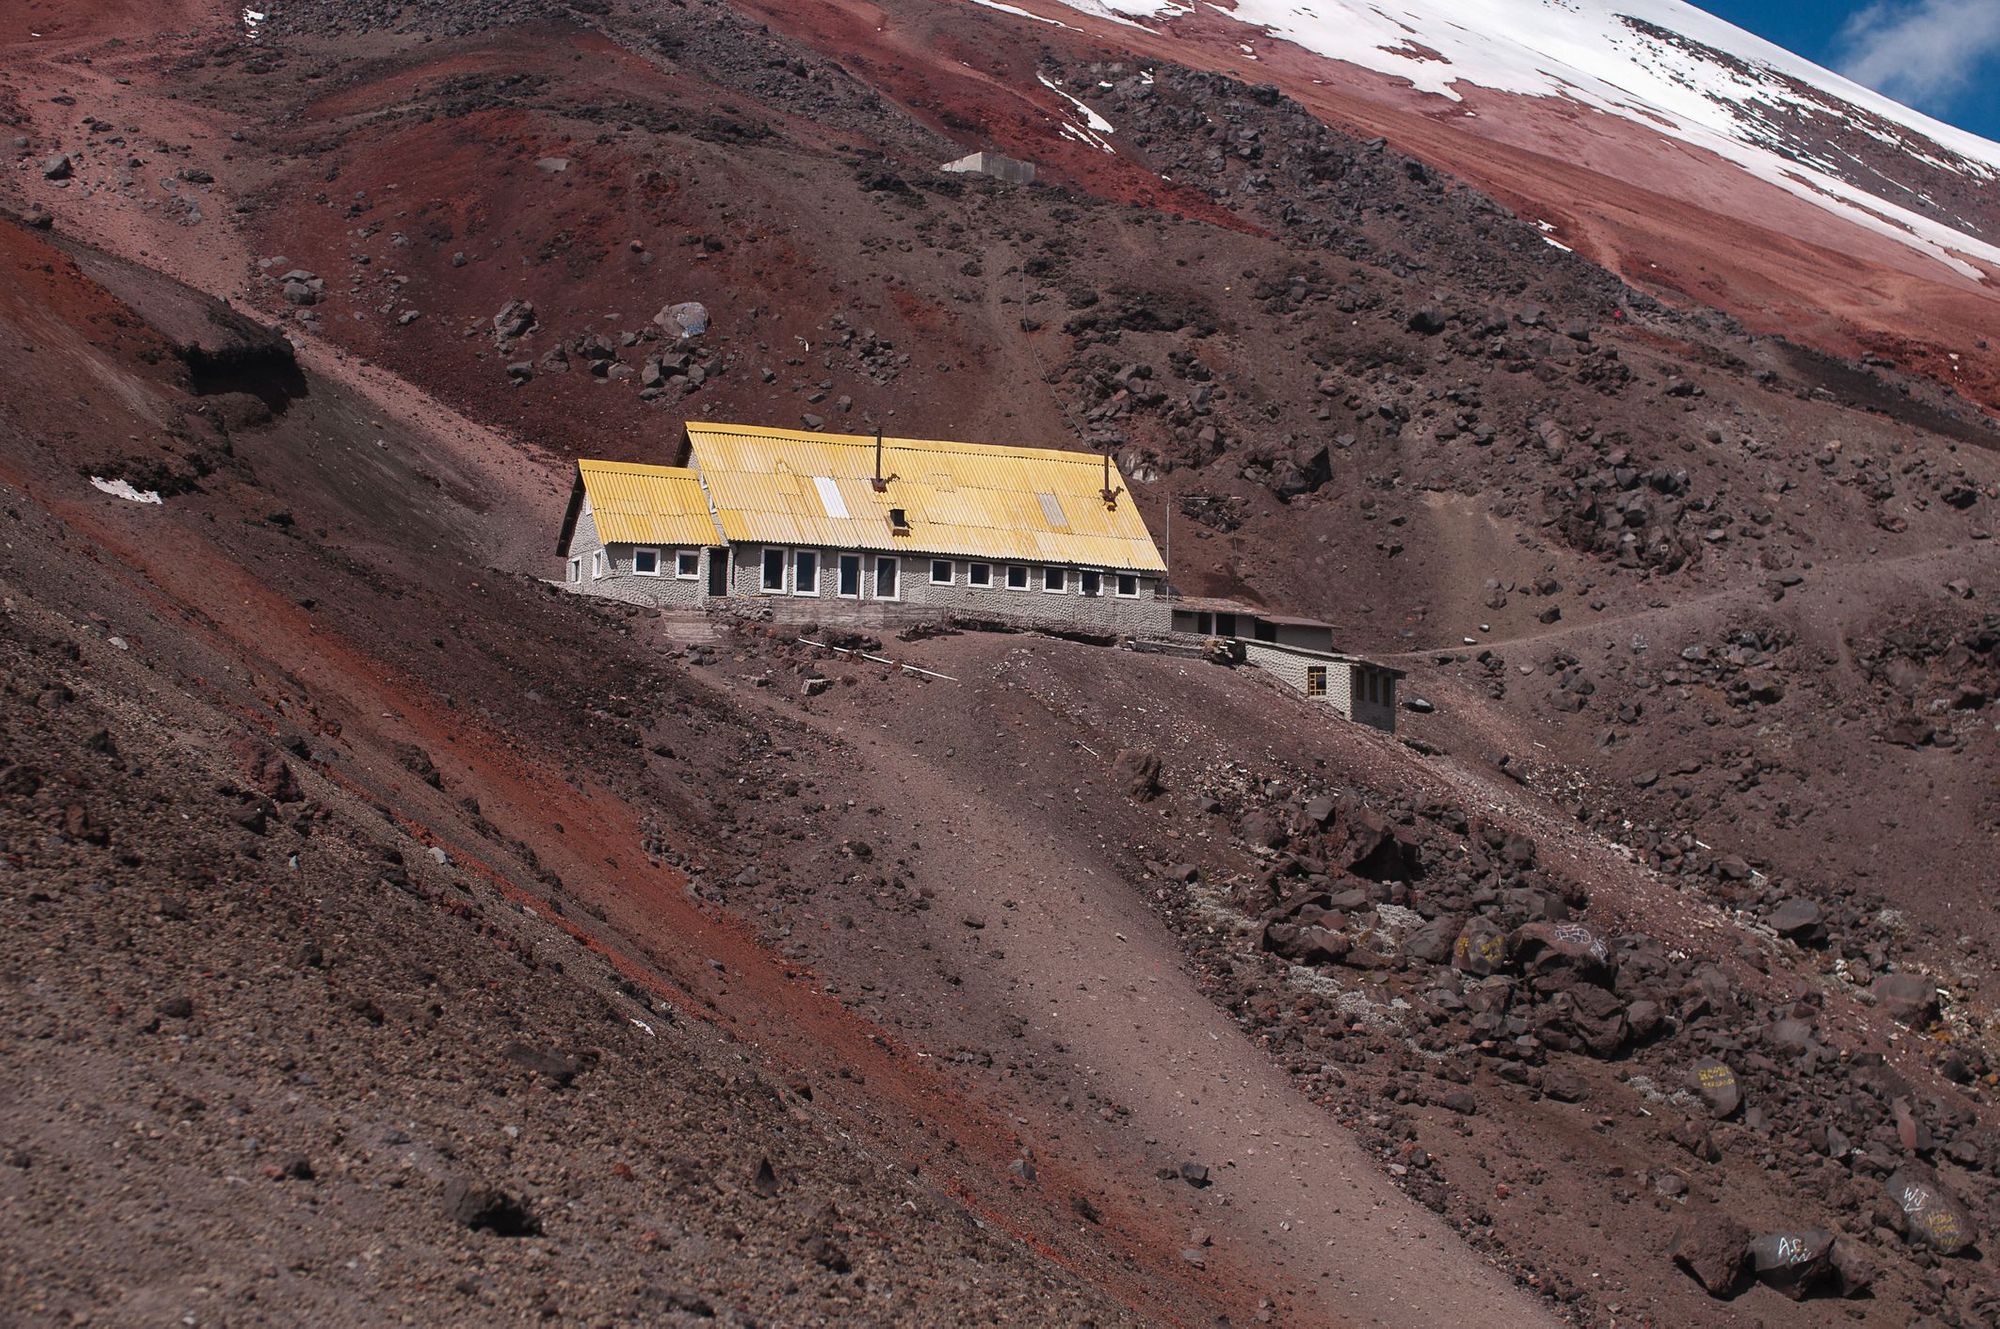 Jose Rivas Refuge, located at an elevation of 4,800m on the slopes of Cotopaxi Volcano, Ecuador.